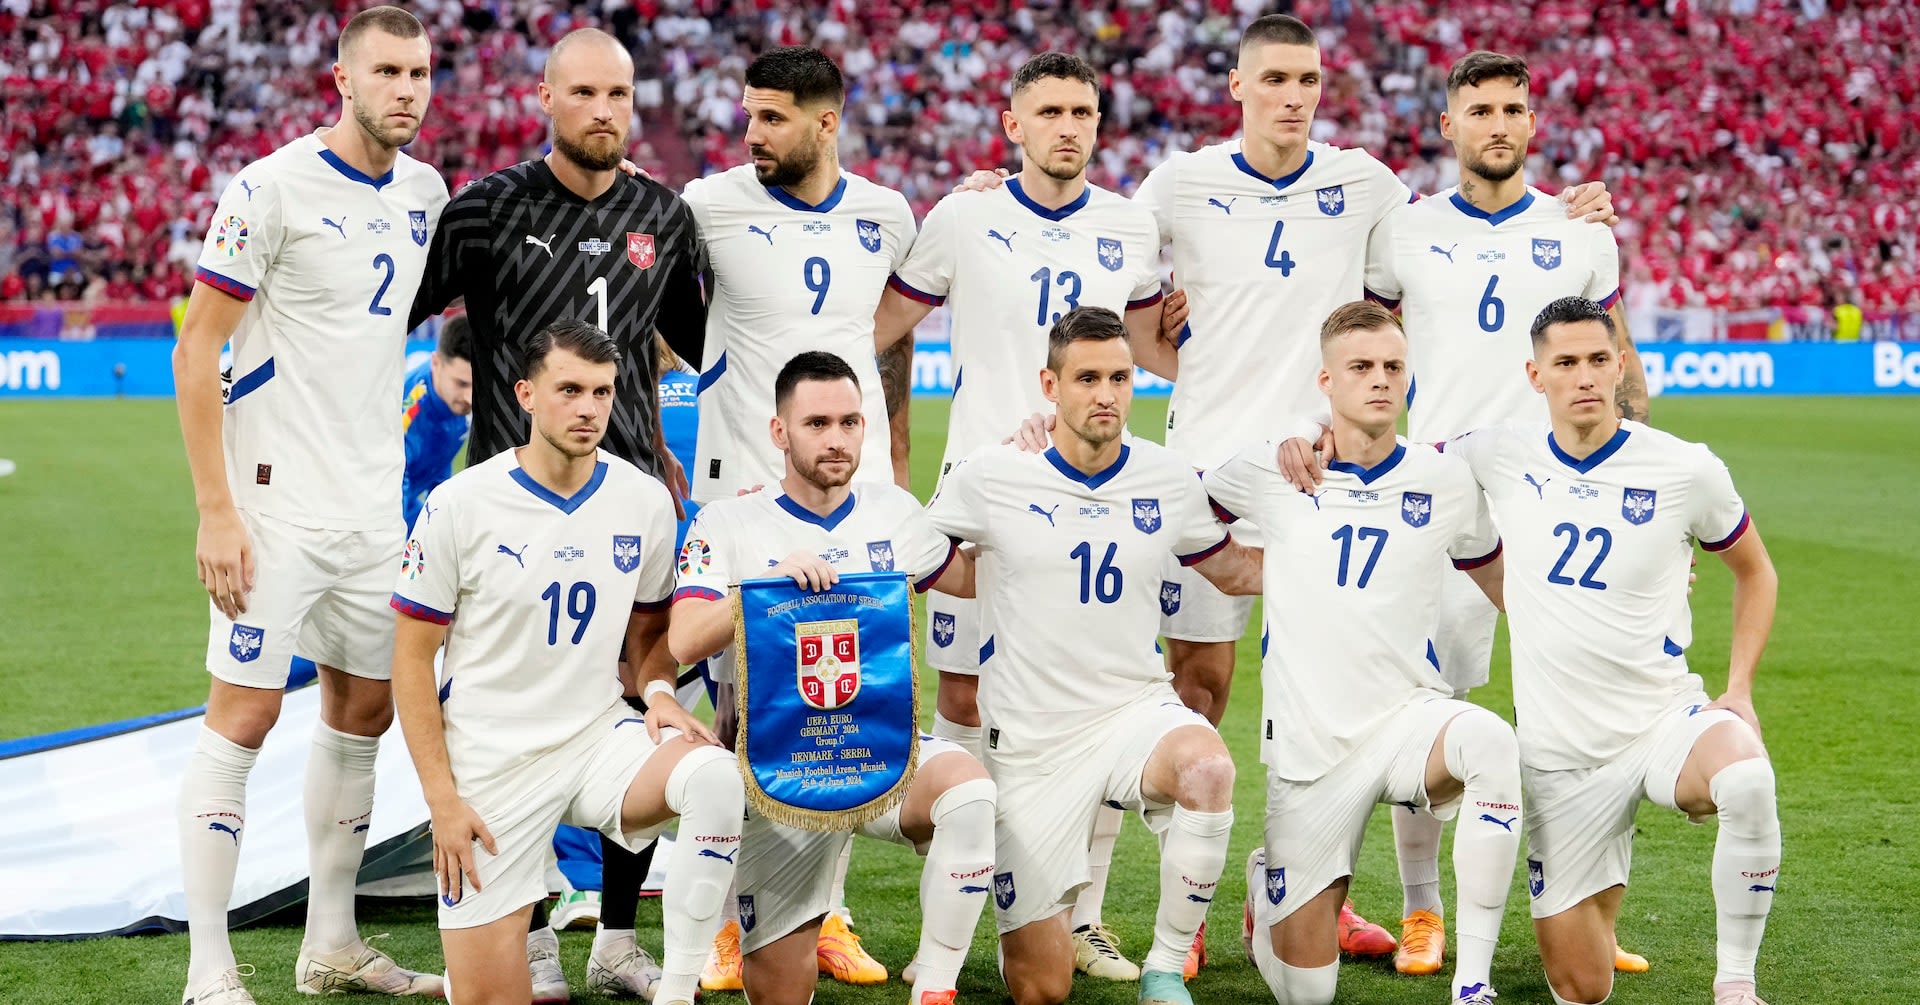 Misfiring Serbia's Euros debut was one to forget